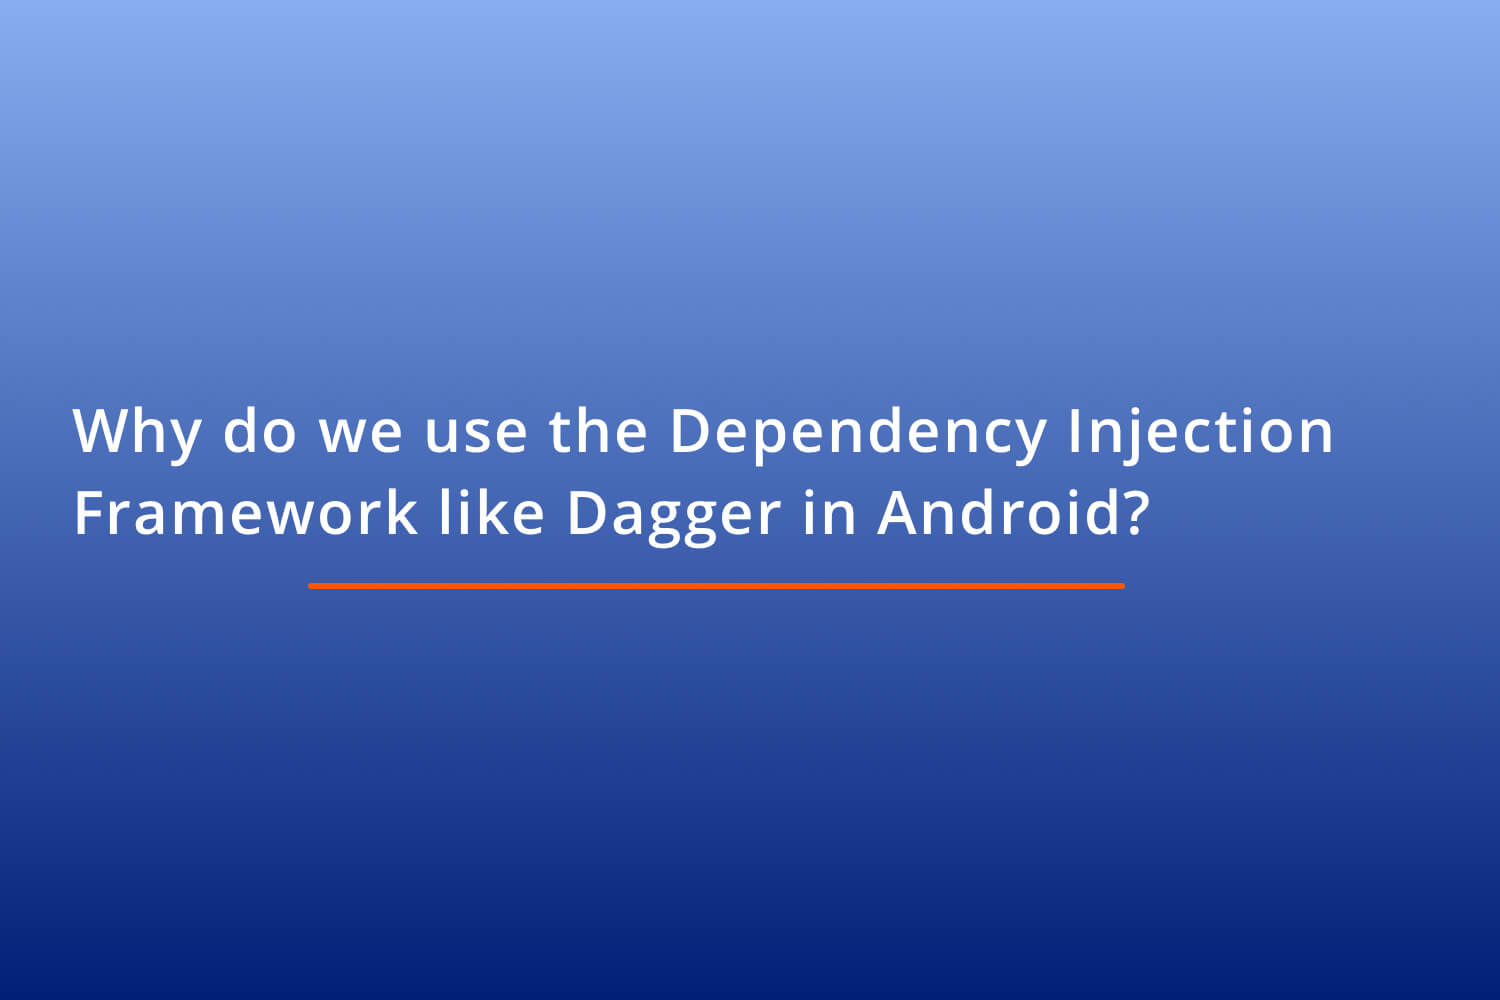 Why do we use the Dependency Injection Framework like Dagger in Android?